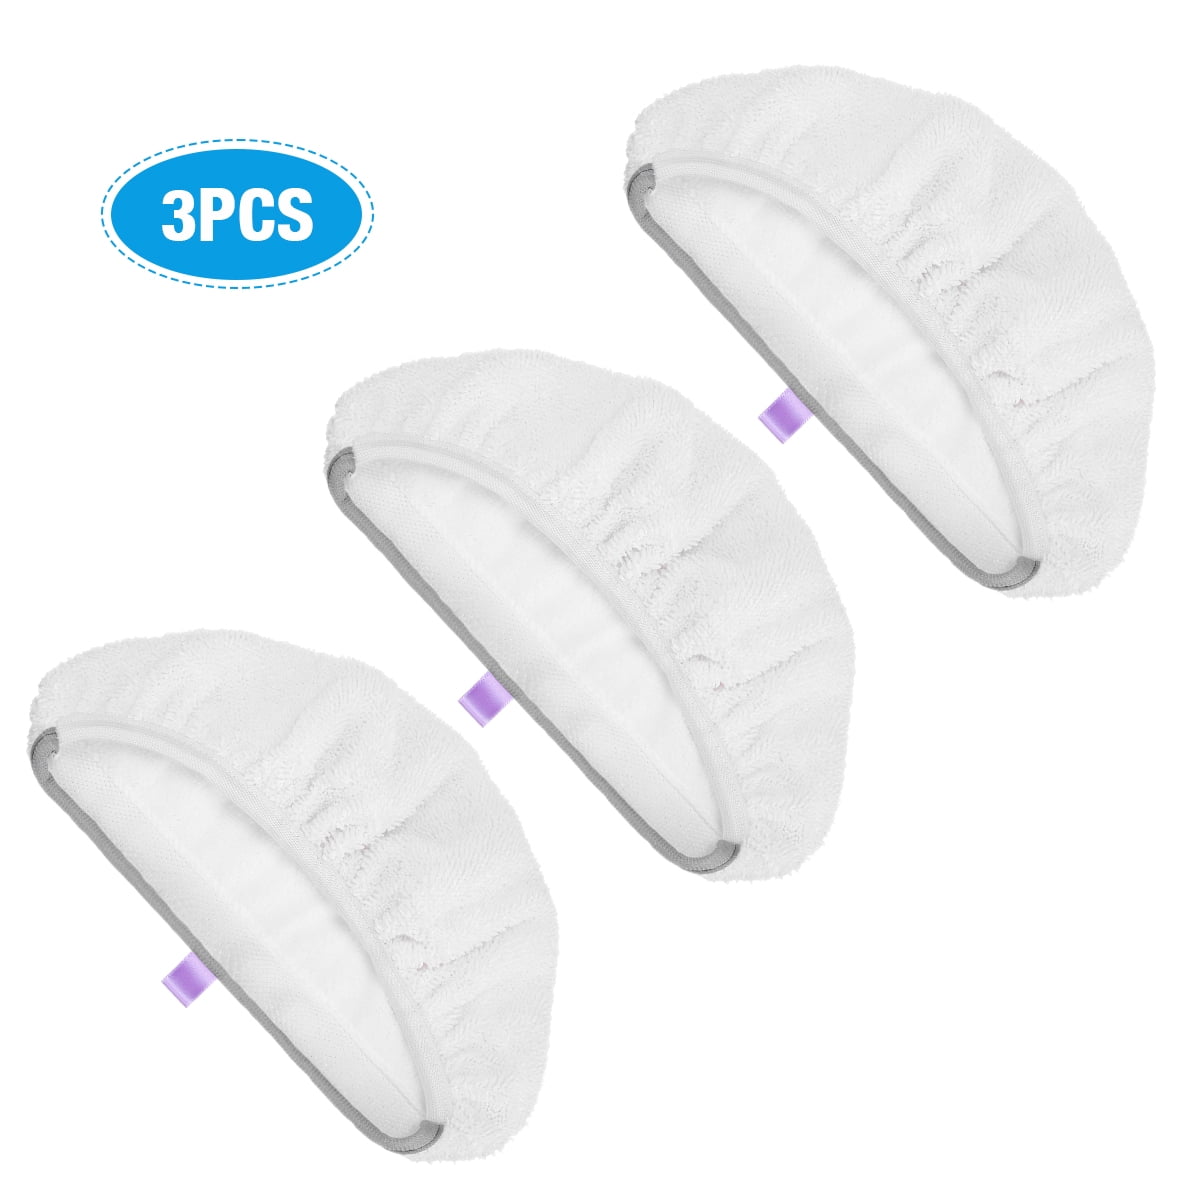 3 Steam Mop Pads fits Bissell PowerFresh Pad 1940 203-2633 19402 19404 19408 